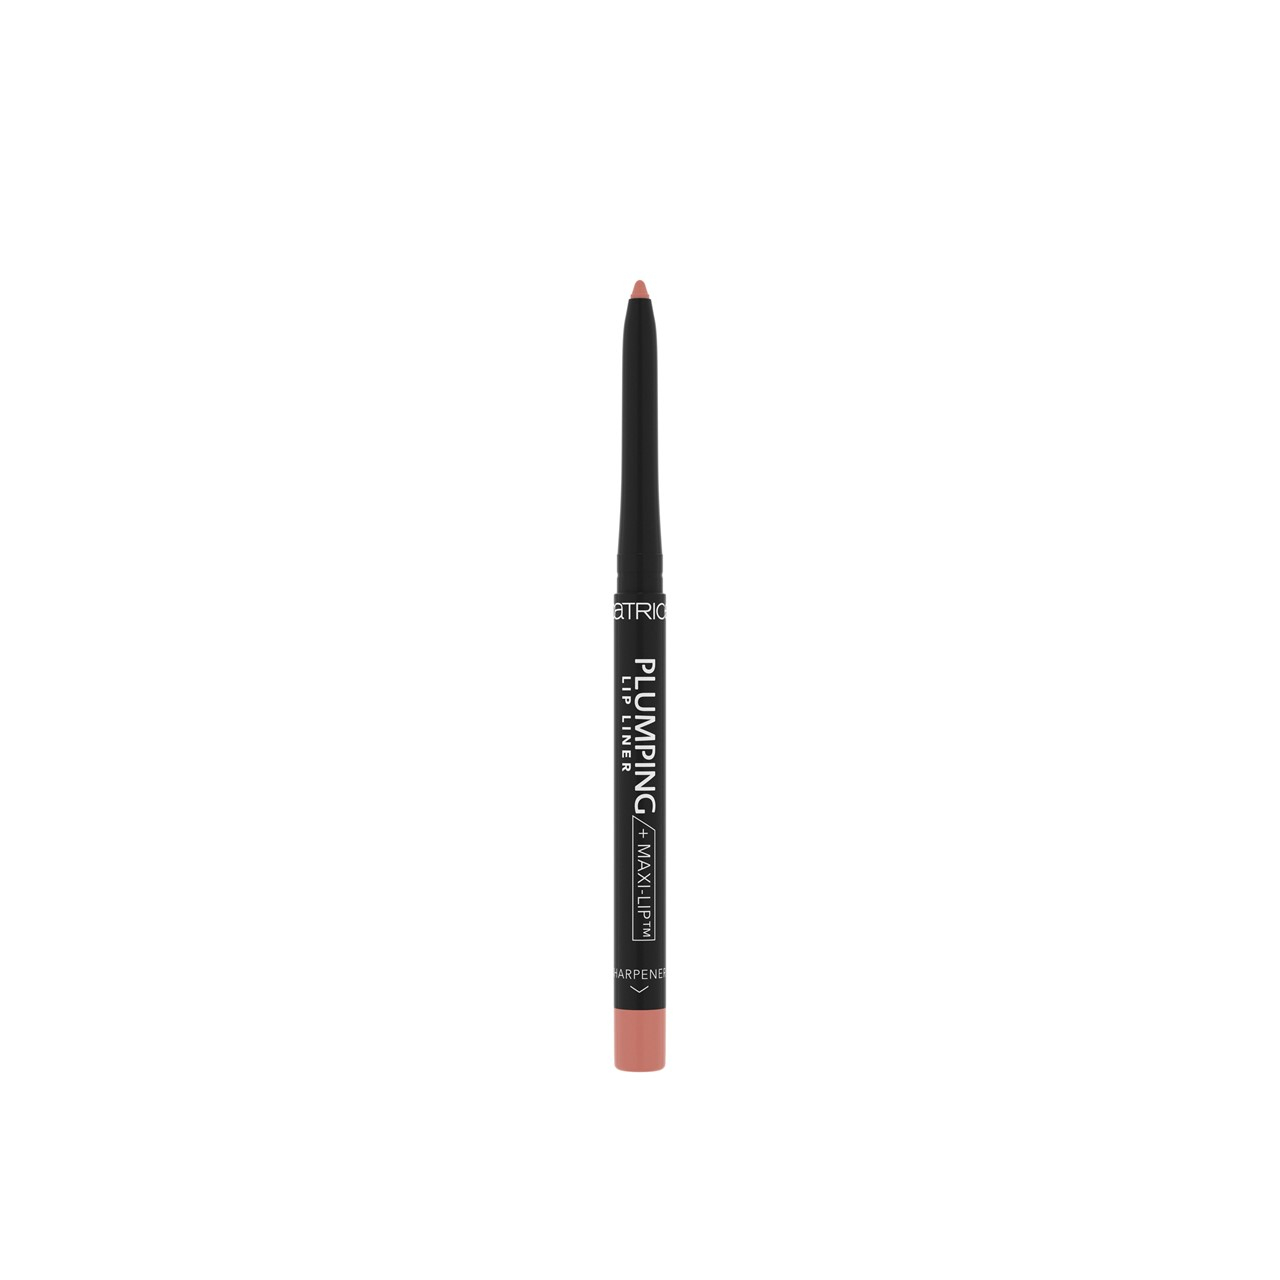 Catrice Plumping Lip Liner 010 Understated Chic 0.35g (0.01oz)